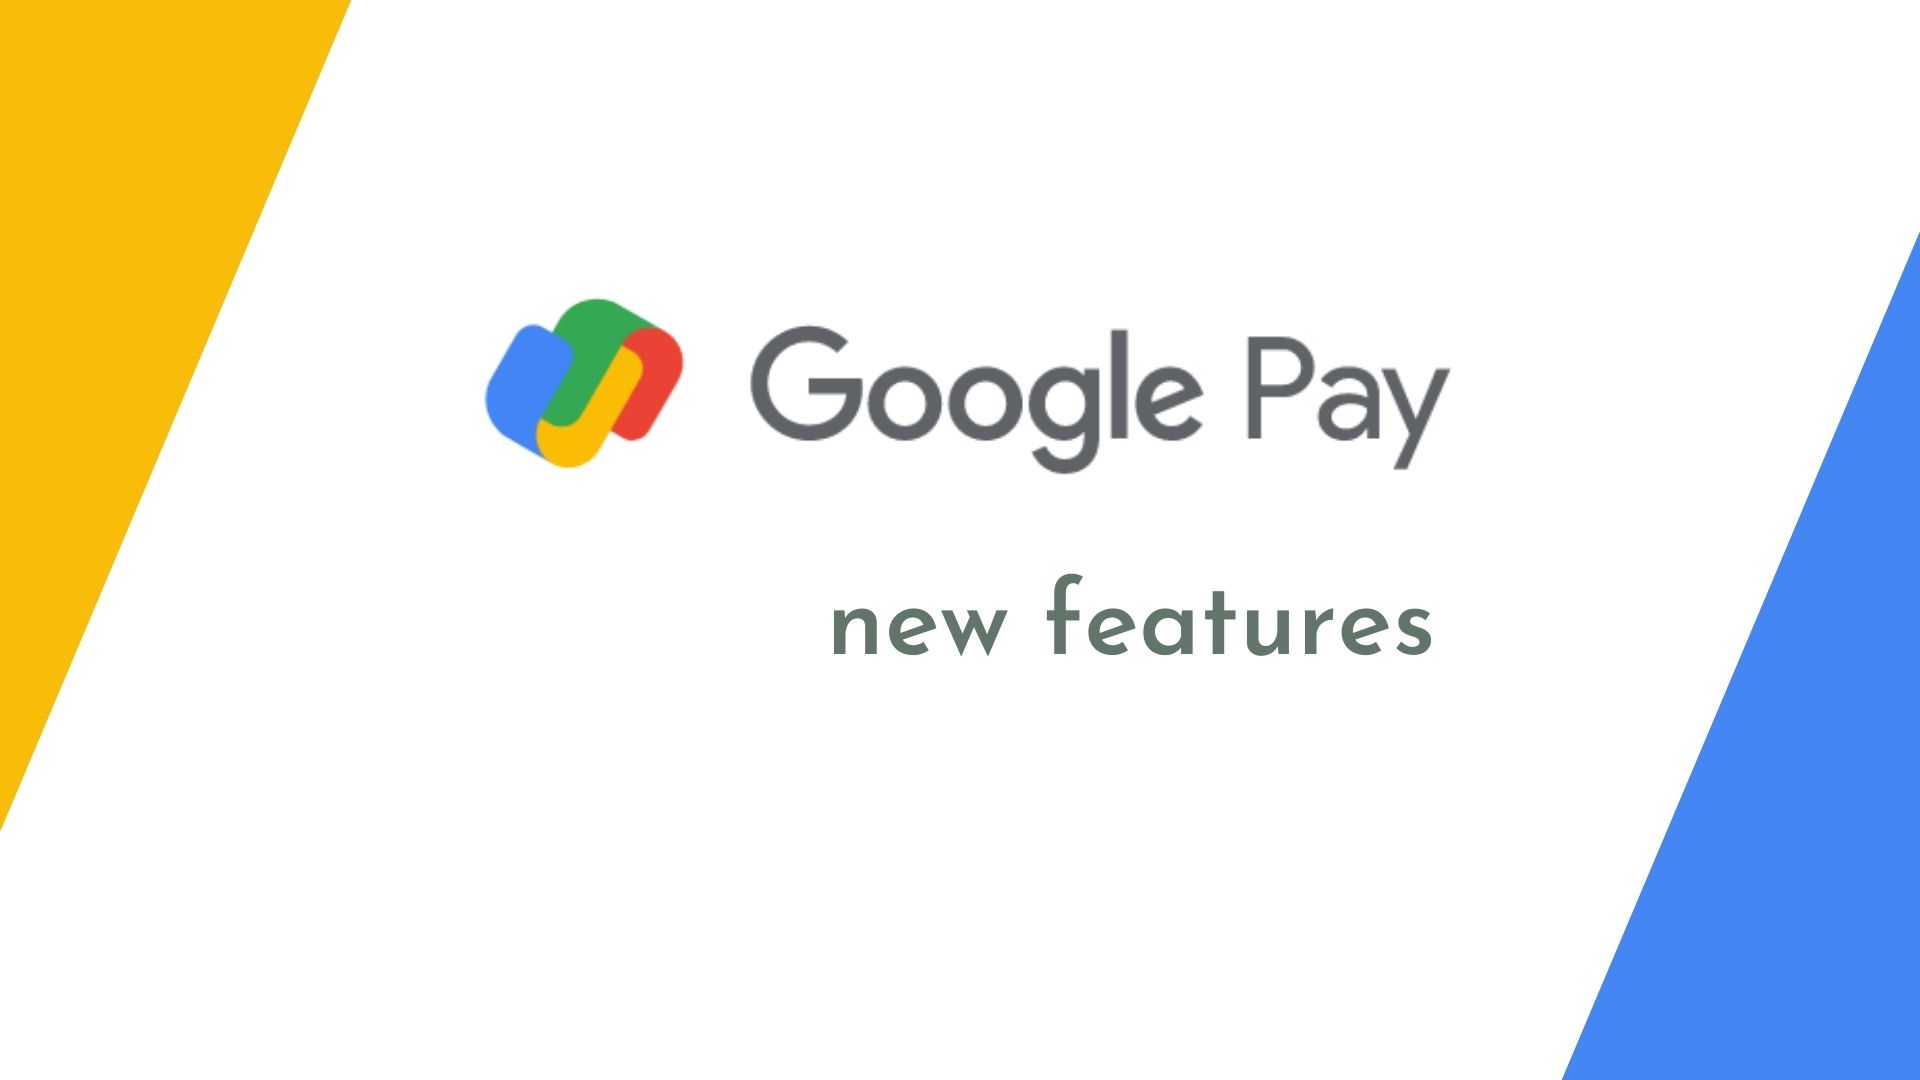 Google Pay new features